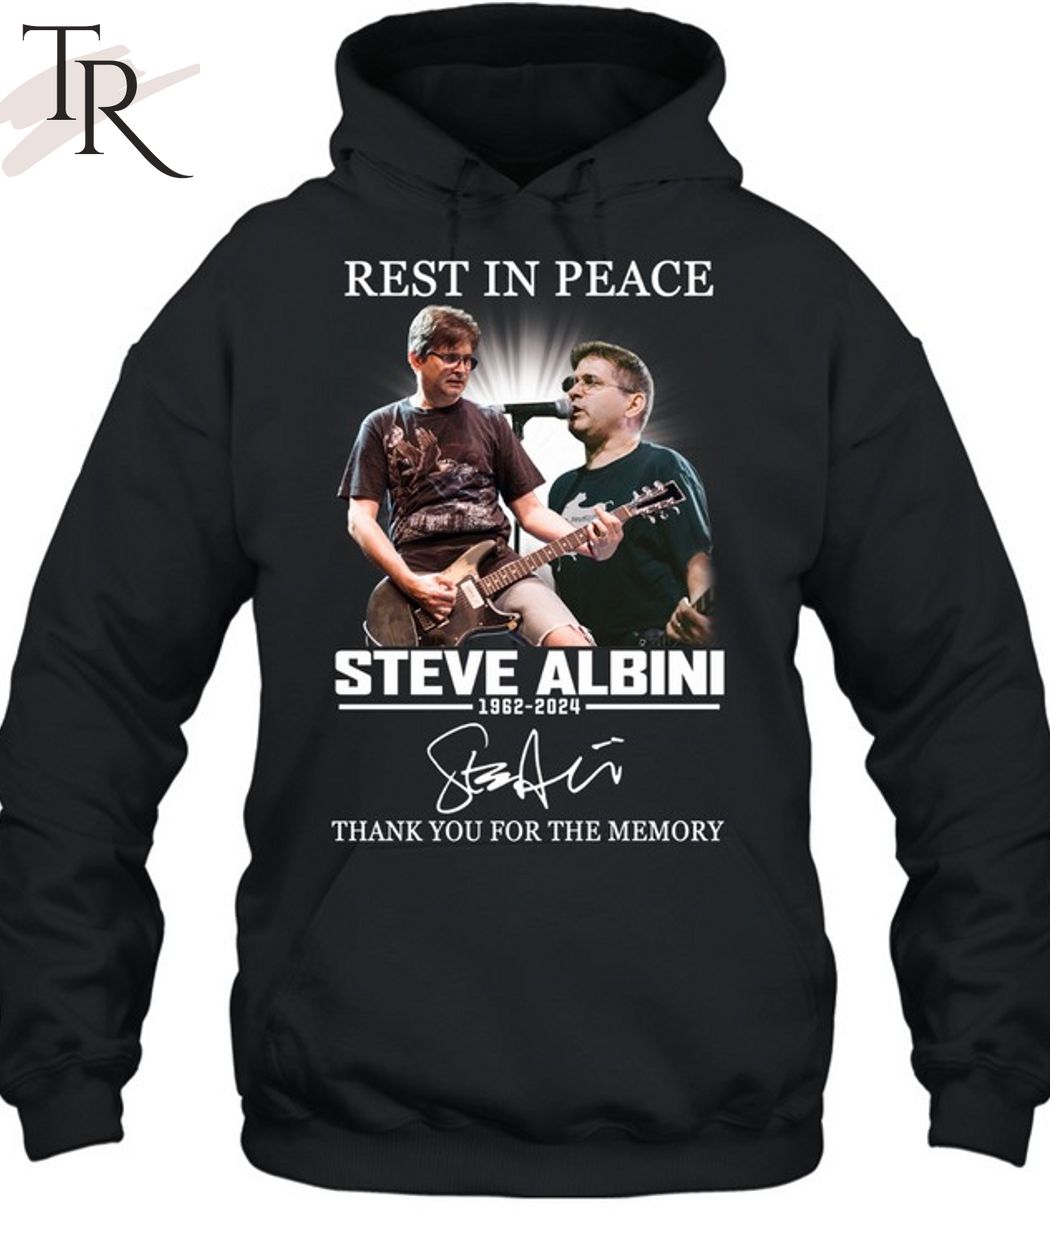 Rest In Peace Steve Albini 1962-2024 Thank You For The Memories T-Shirt